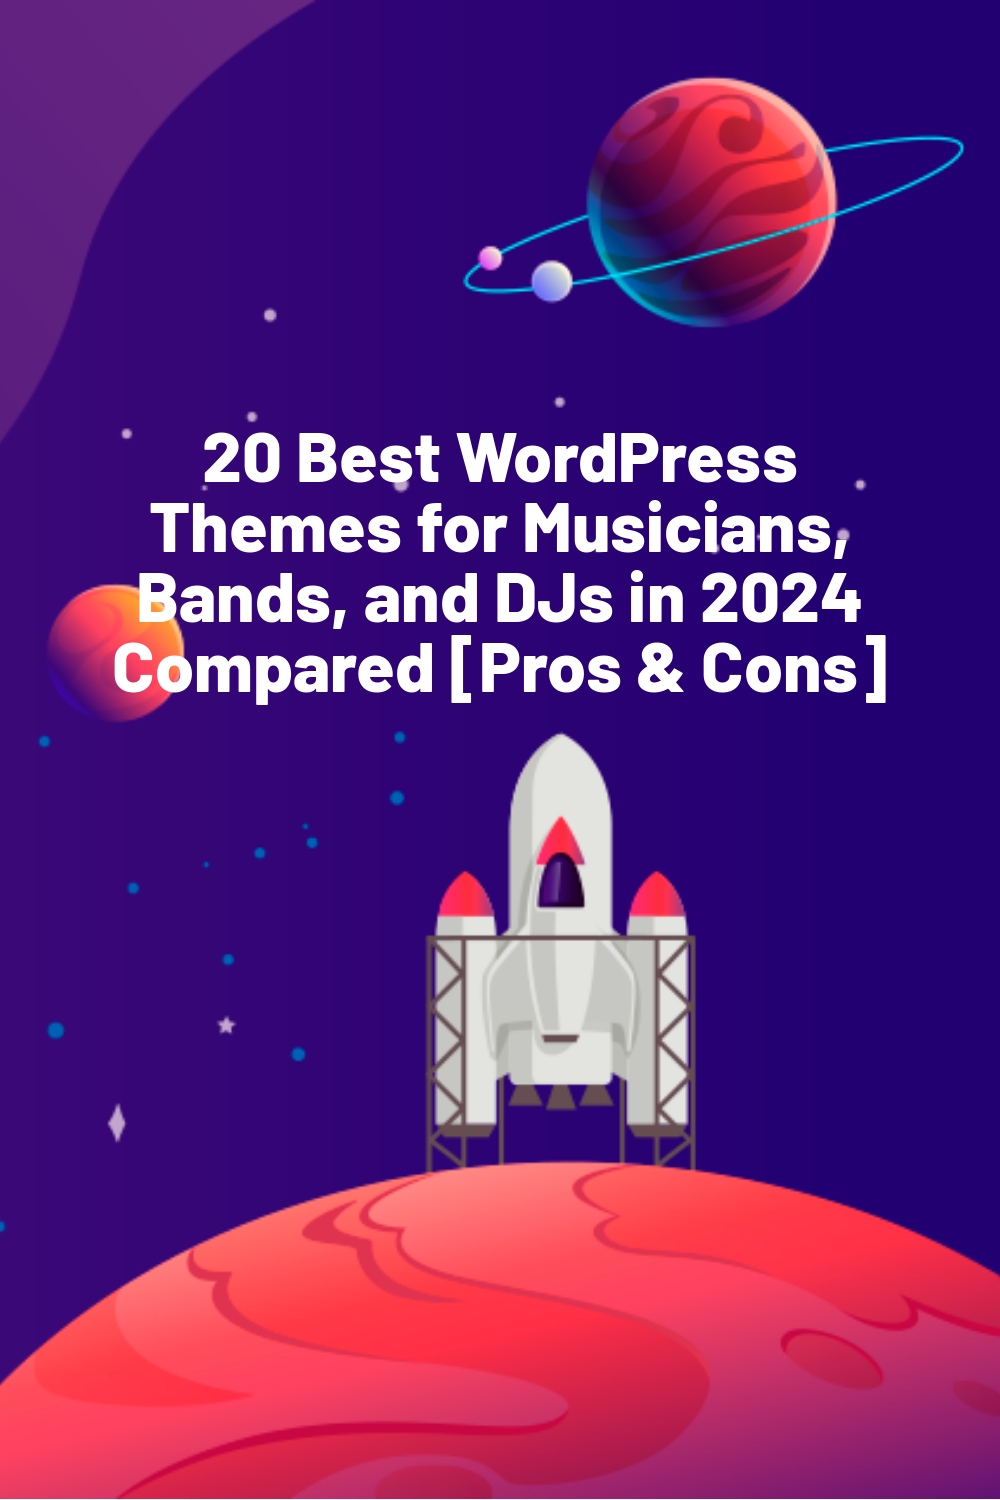 20 Best WordPress Themes for Musicians, Bands, and DJs in 2024 Compared [Pros & Cons]